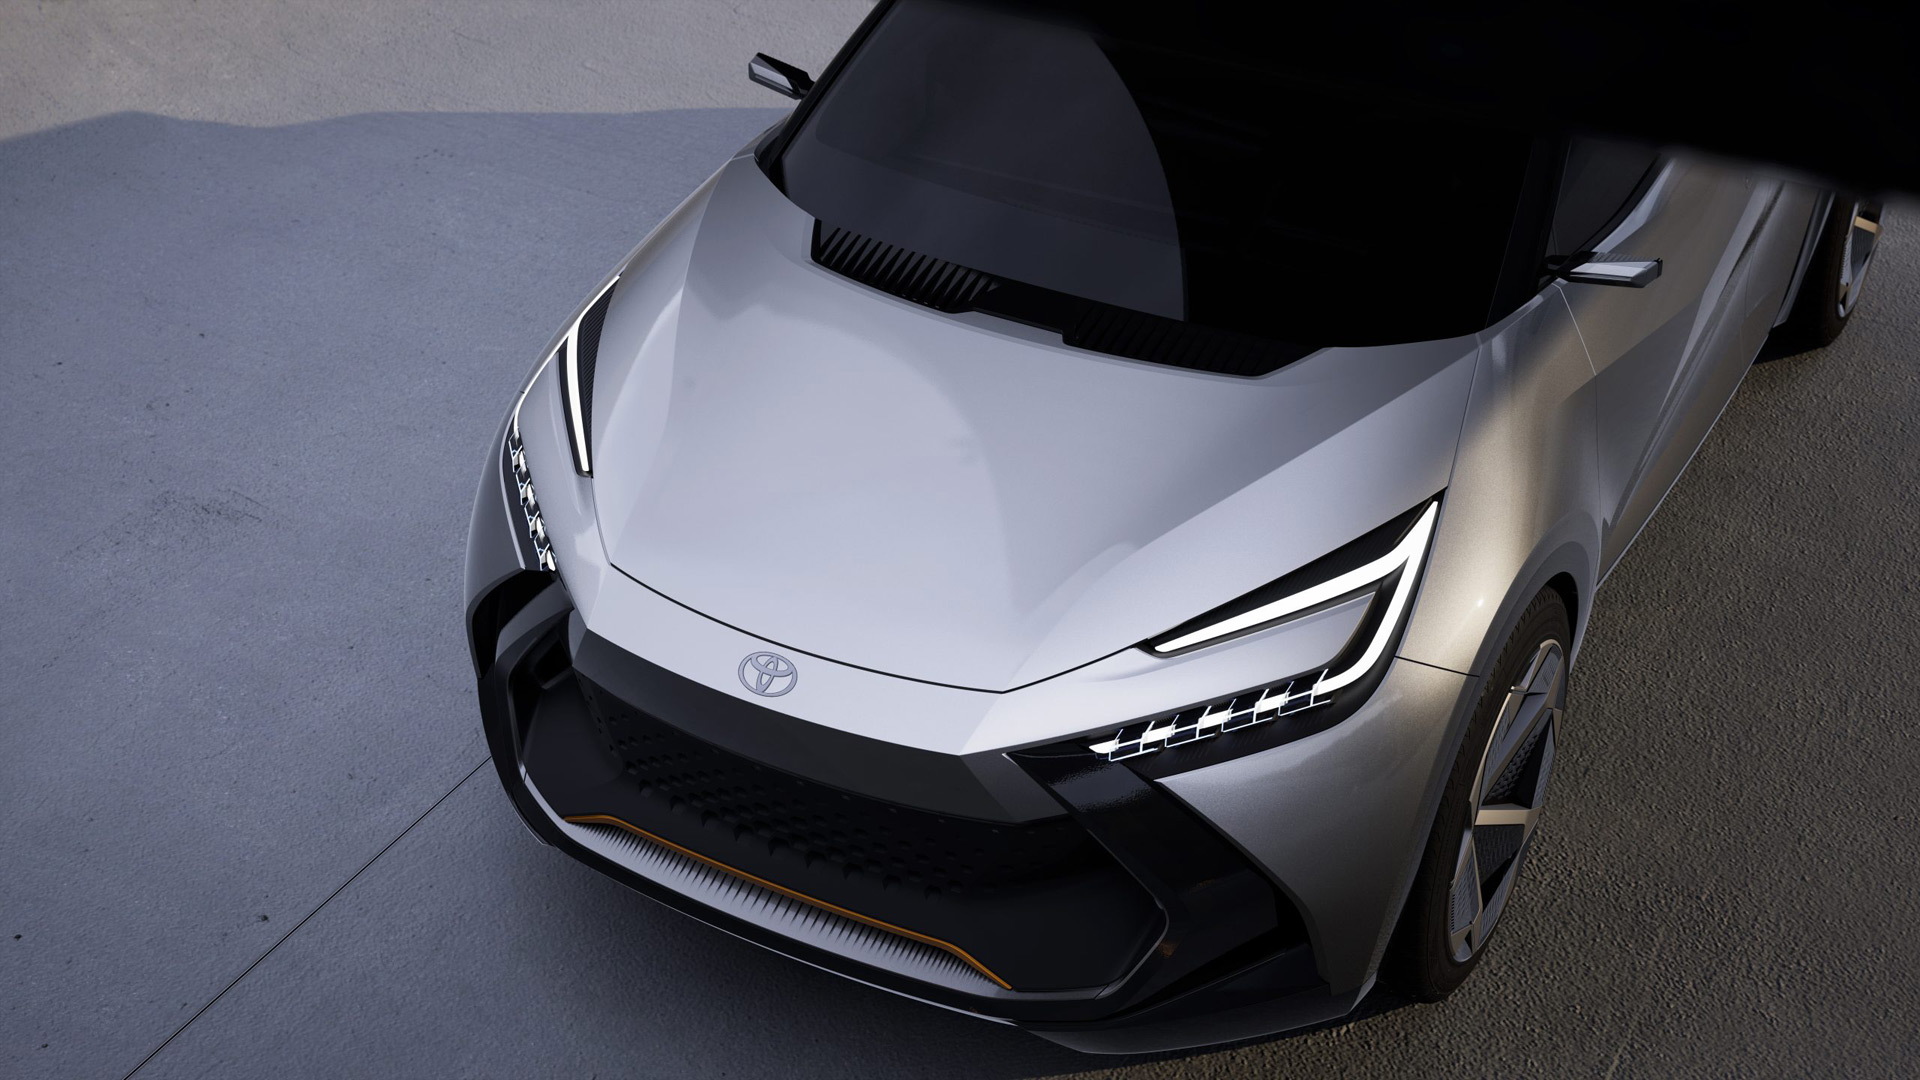 2024 Toyota C-HR Speculatively Rendered Based On Prologue Concept